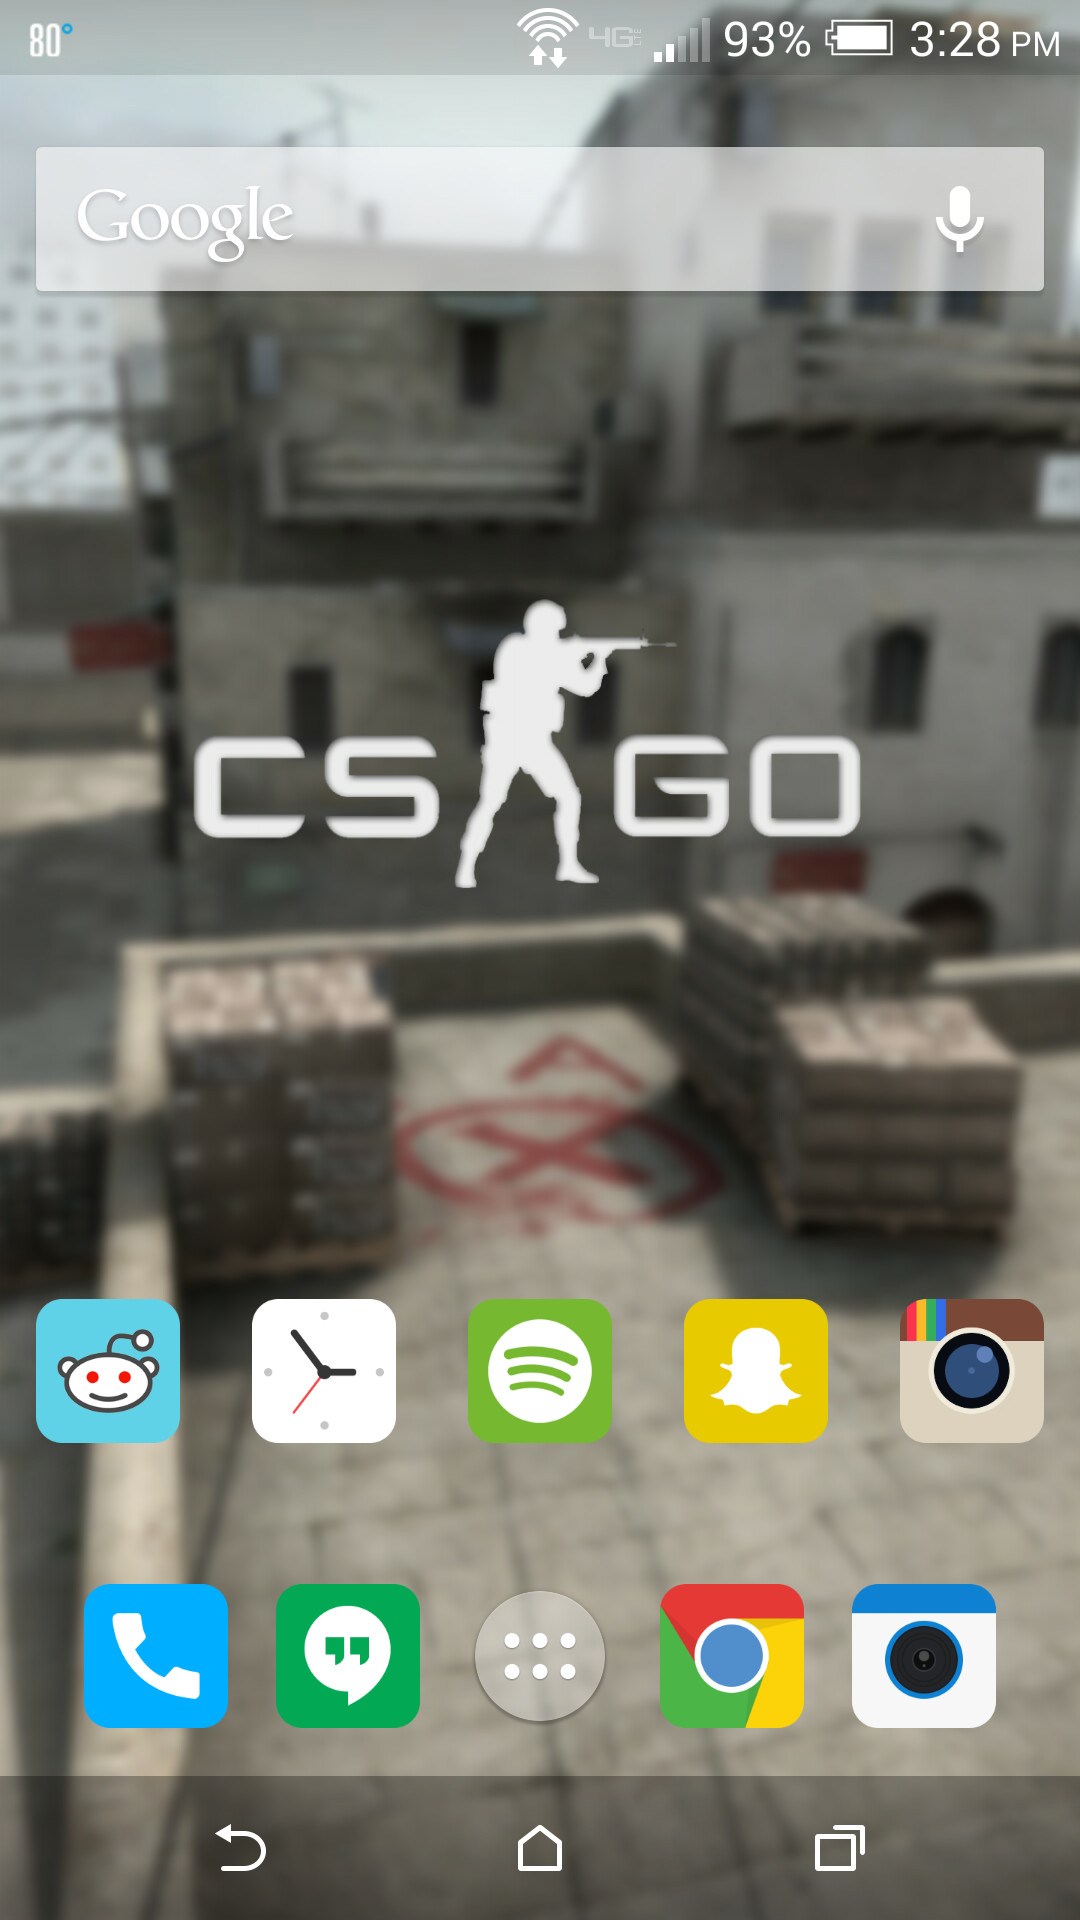 1080x1920 Couldn't find a god CSGO phone wallpaper so I made one. DL link in comments  if you want it.